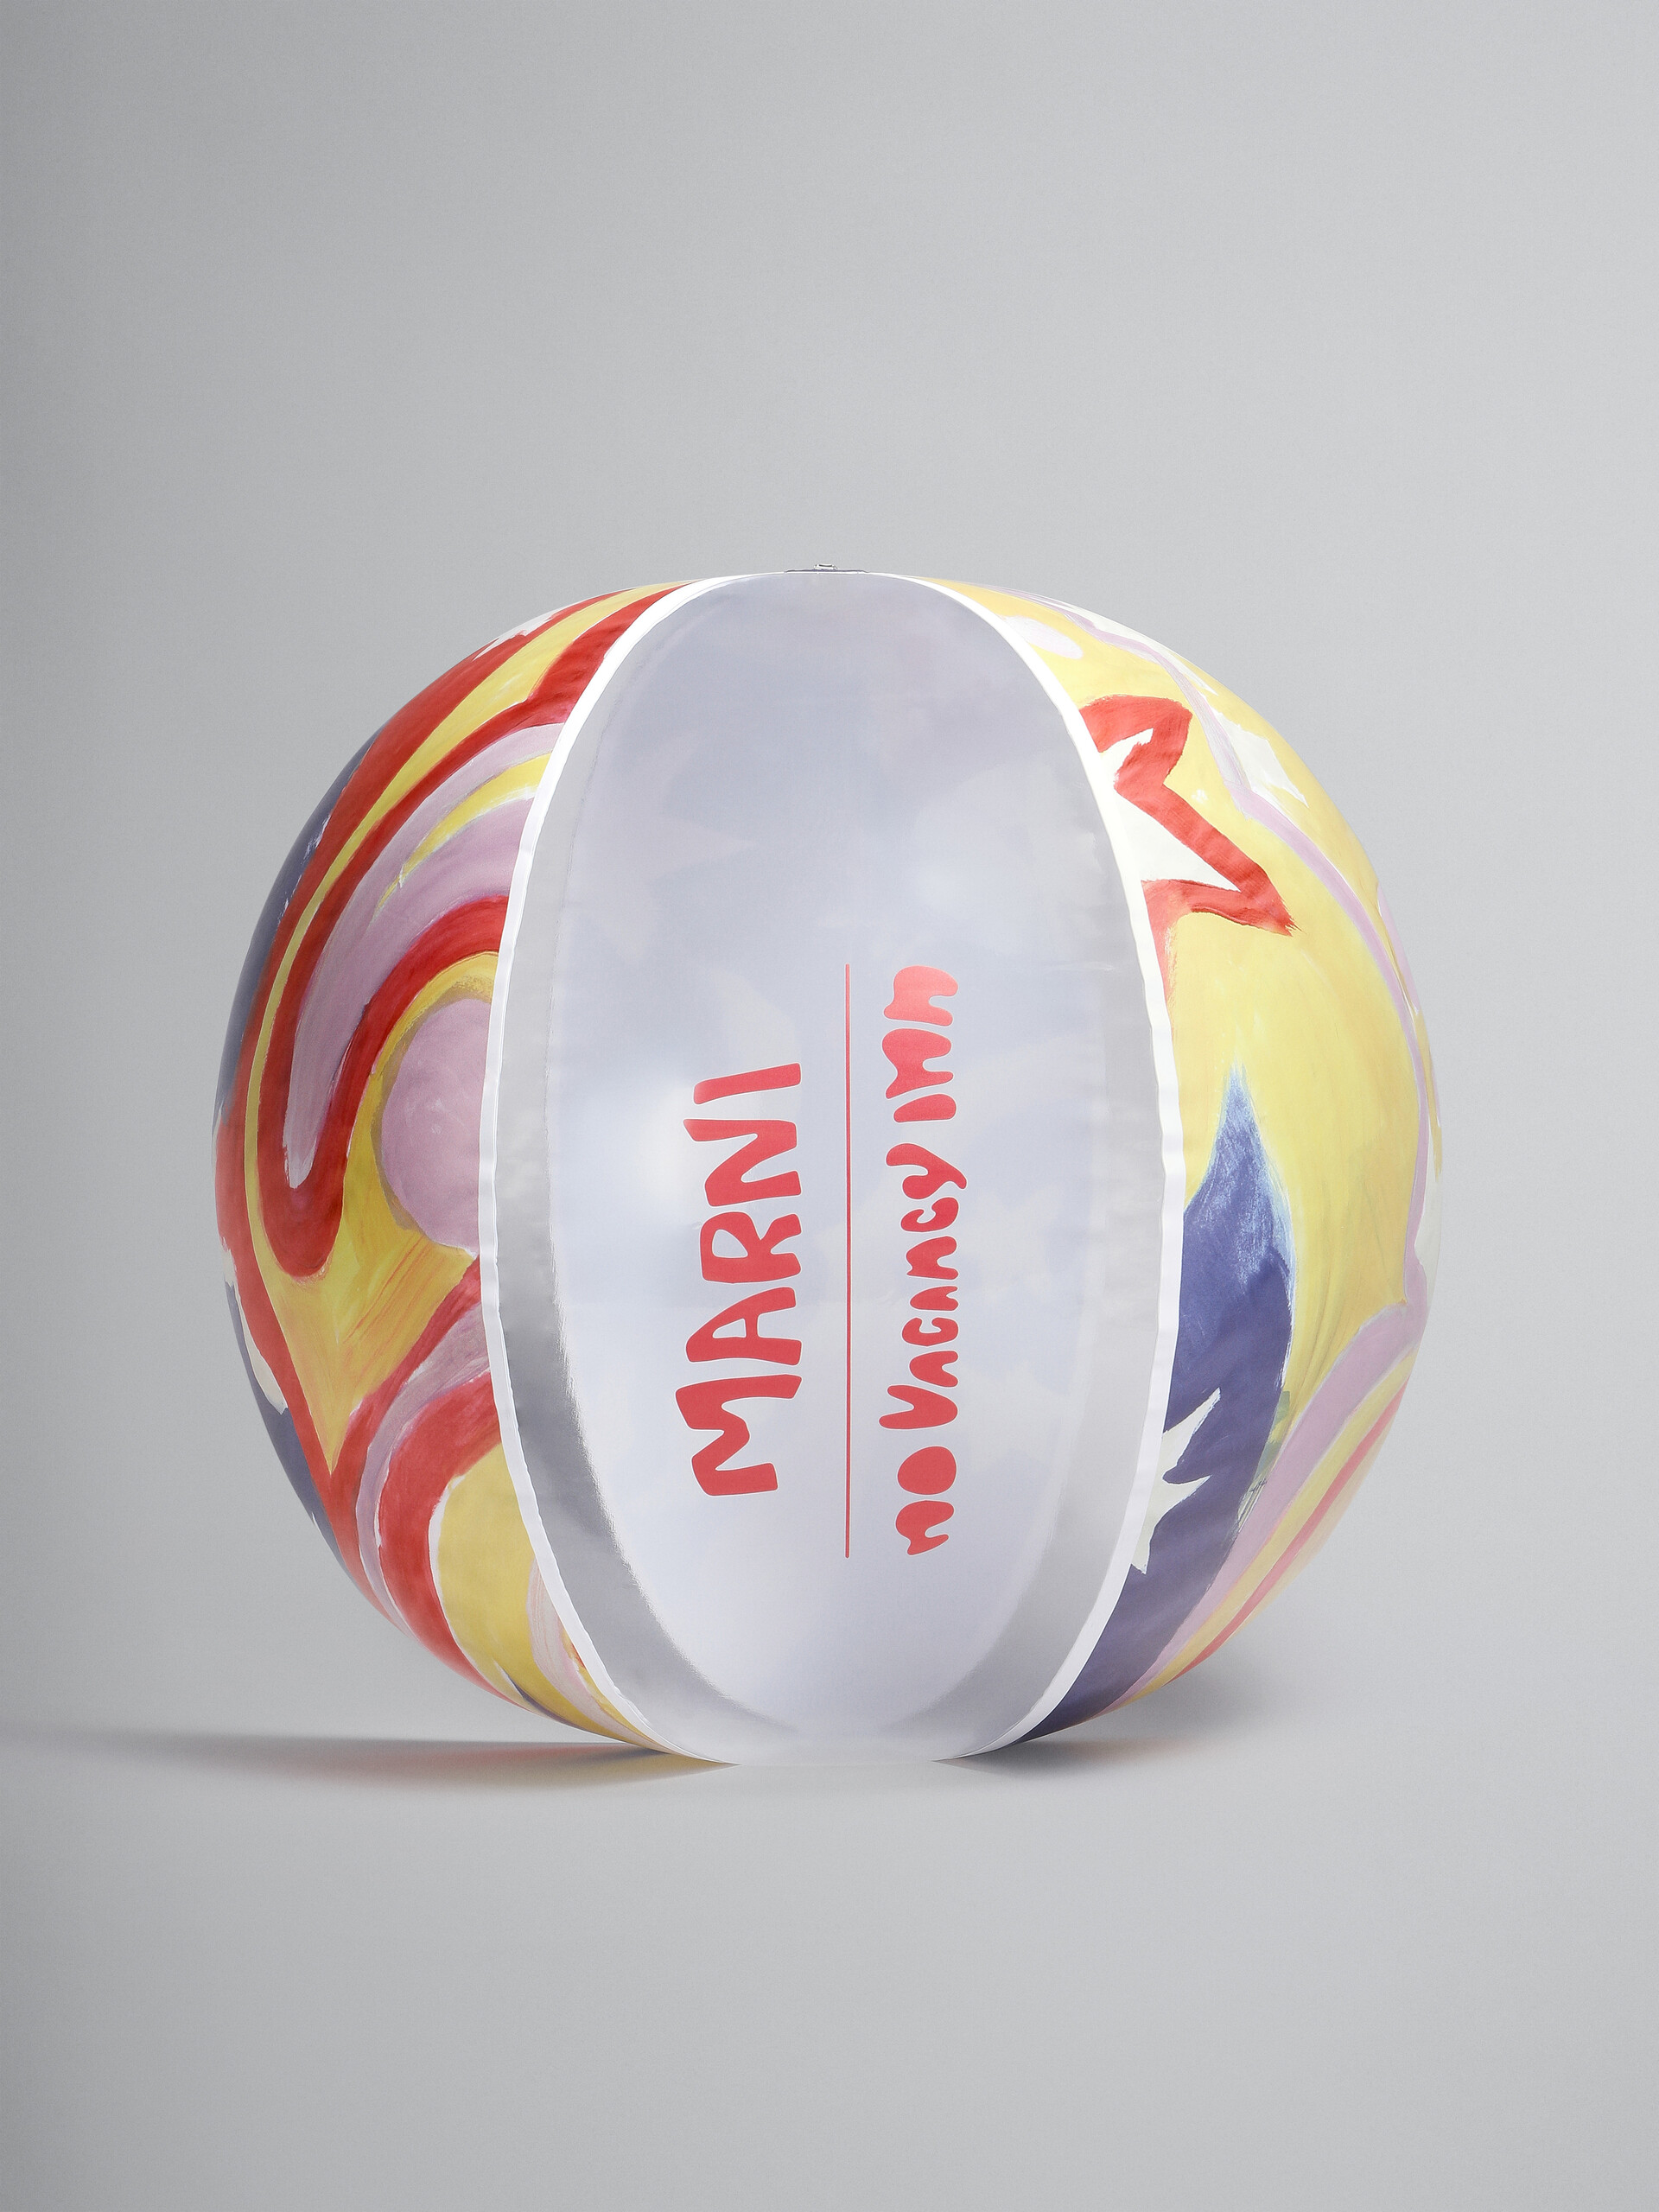 Marni x No Vacancy Inn - Inflatable ball with Galactic Paradise print - Other accessories - Image 1